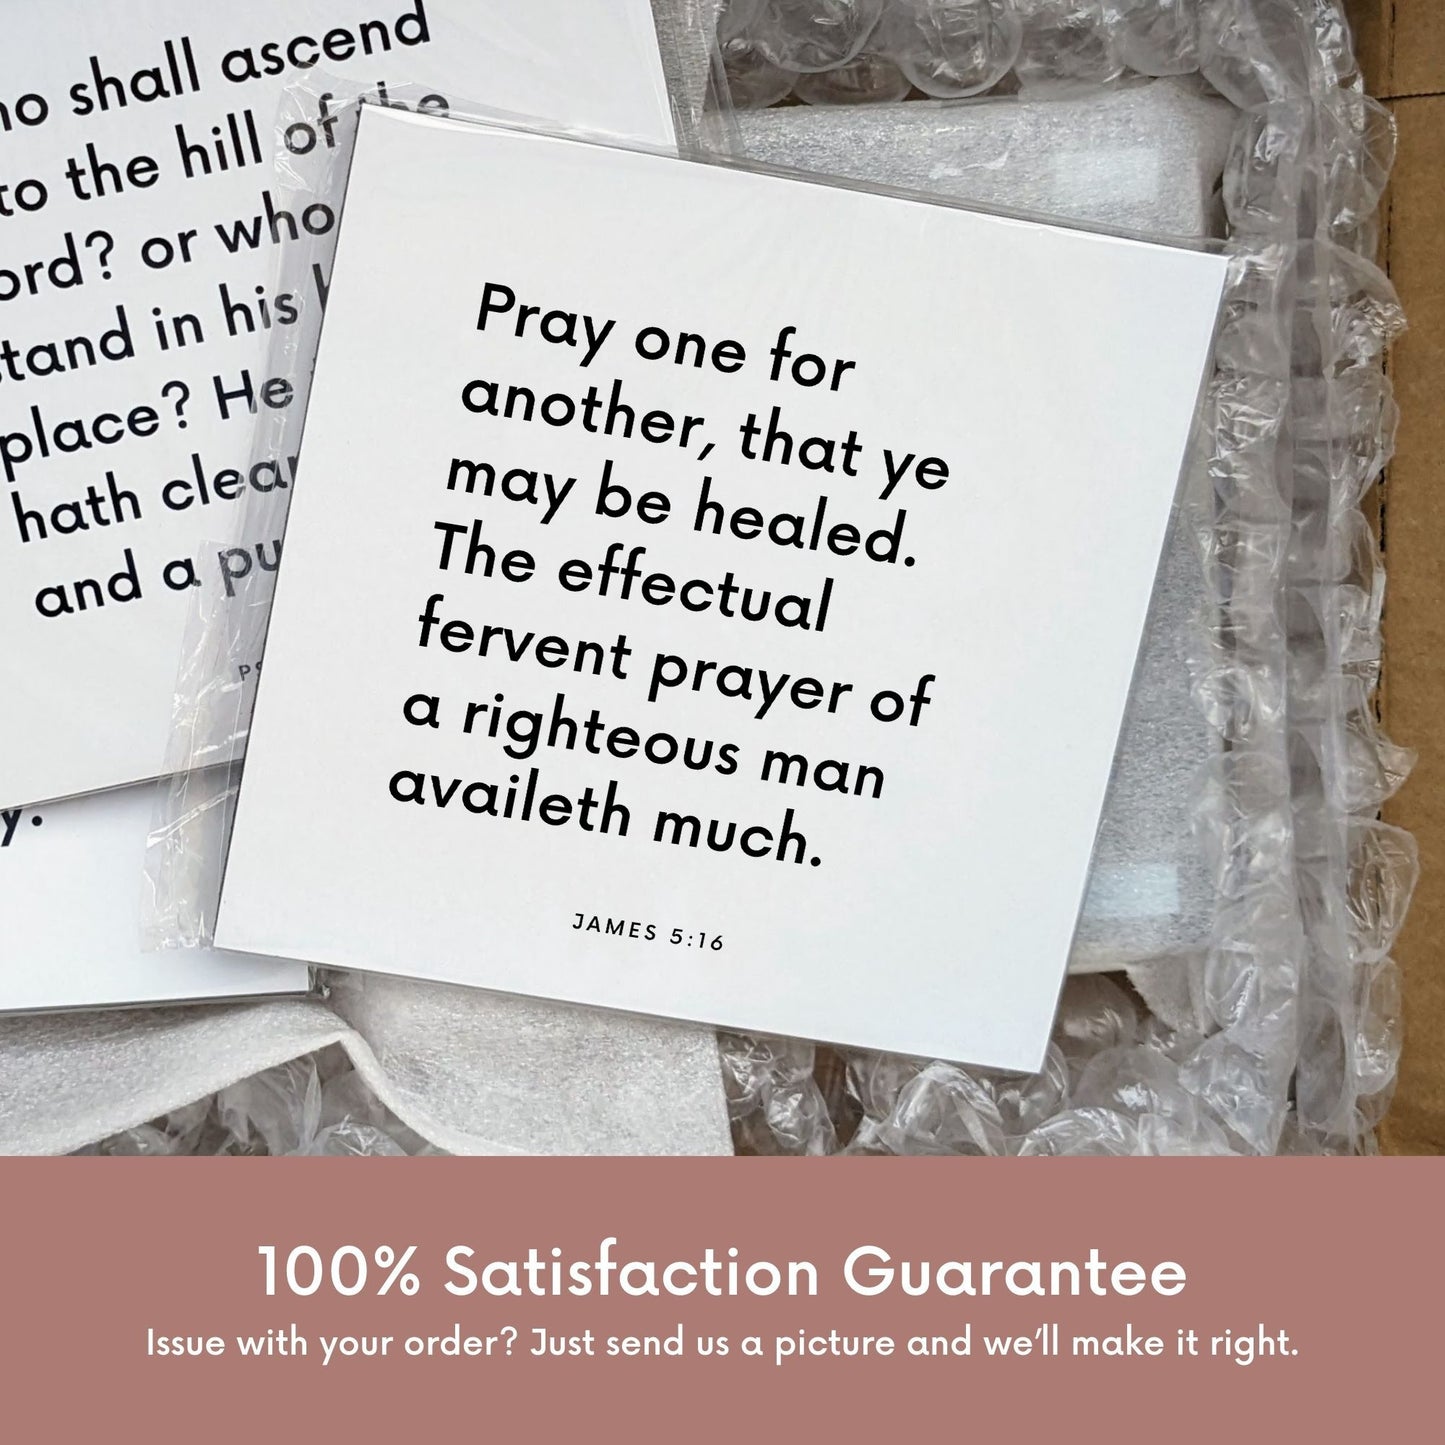 Shipping materials for scripture tile of James 5:16 - "Pray one for another, that ye may be healed"